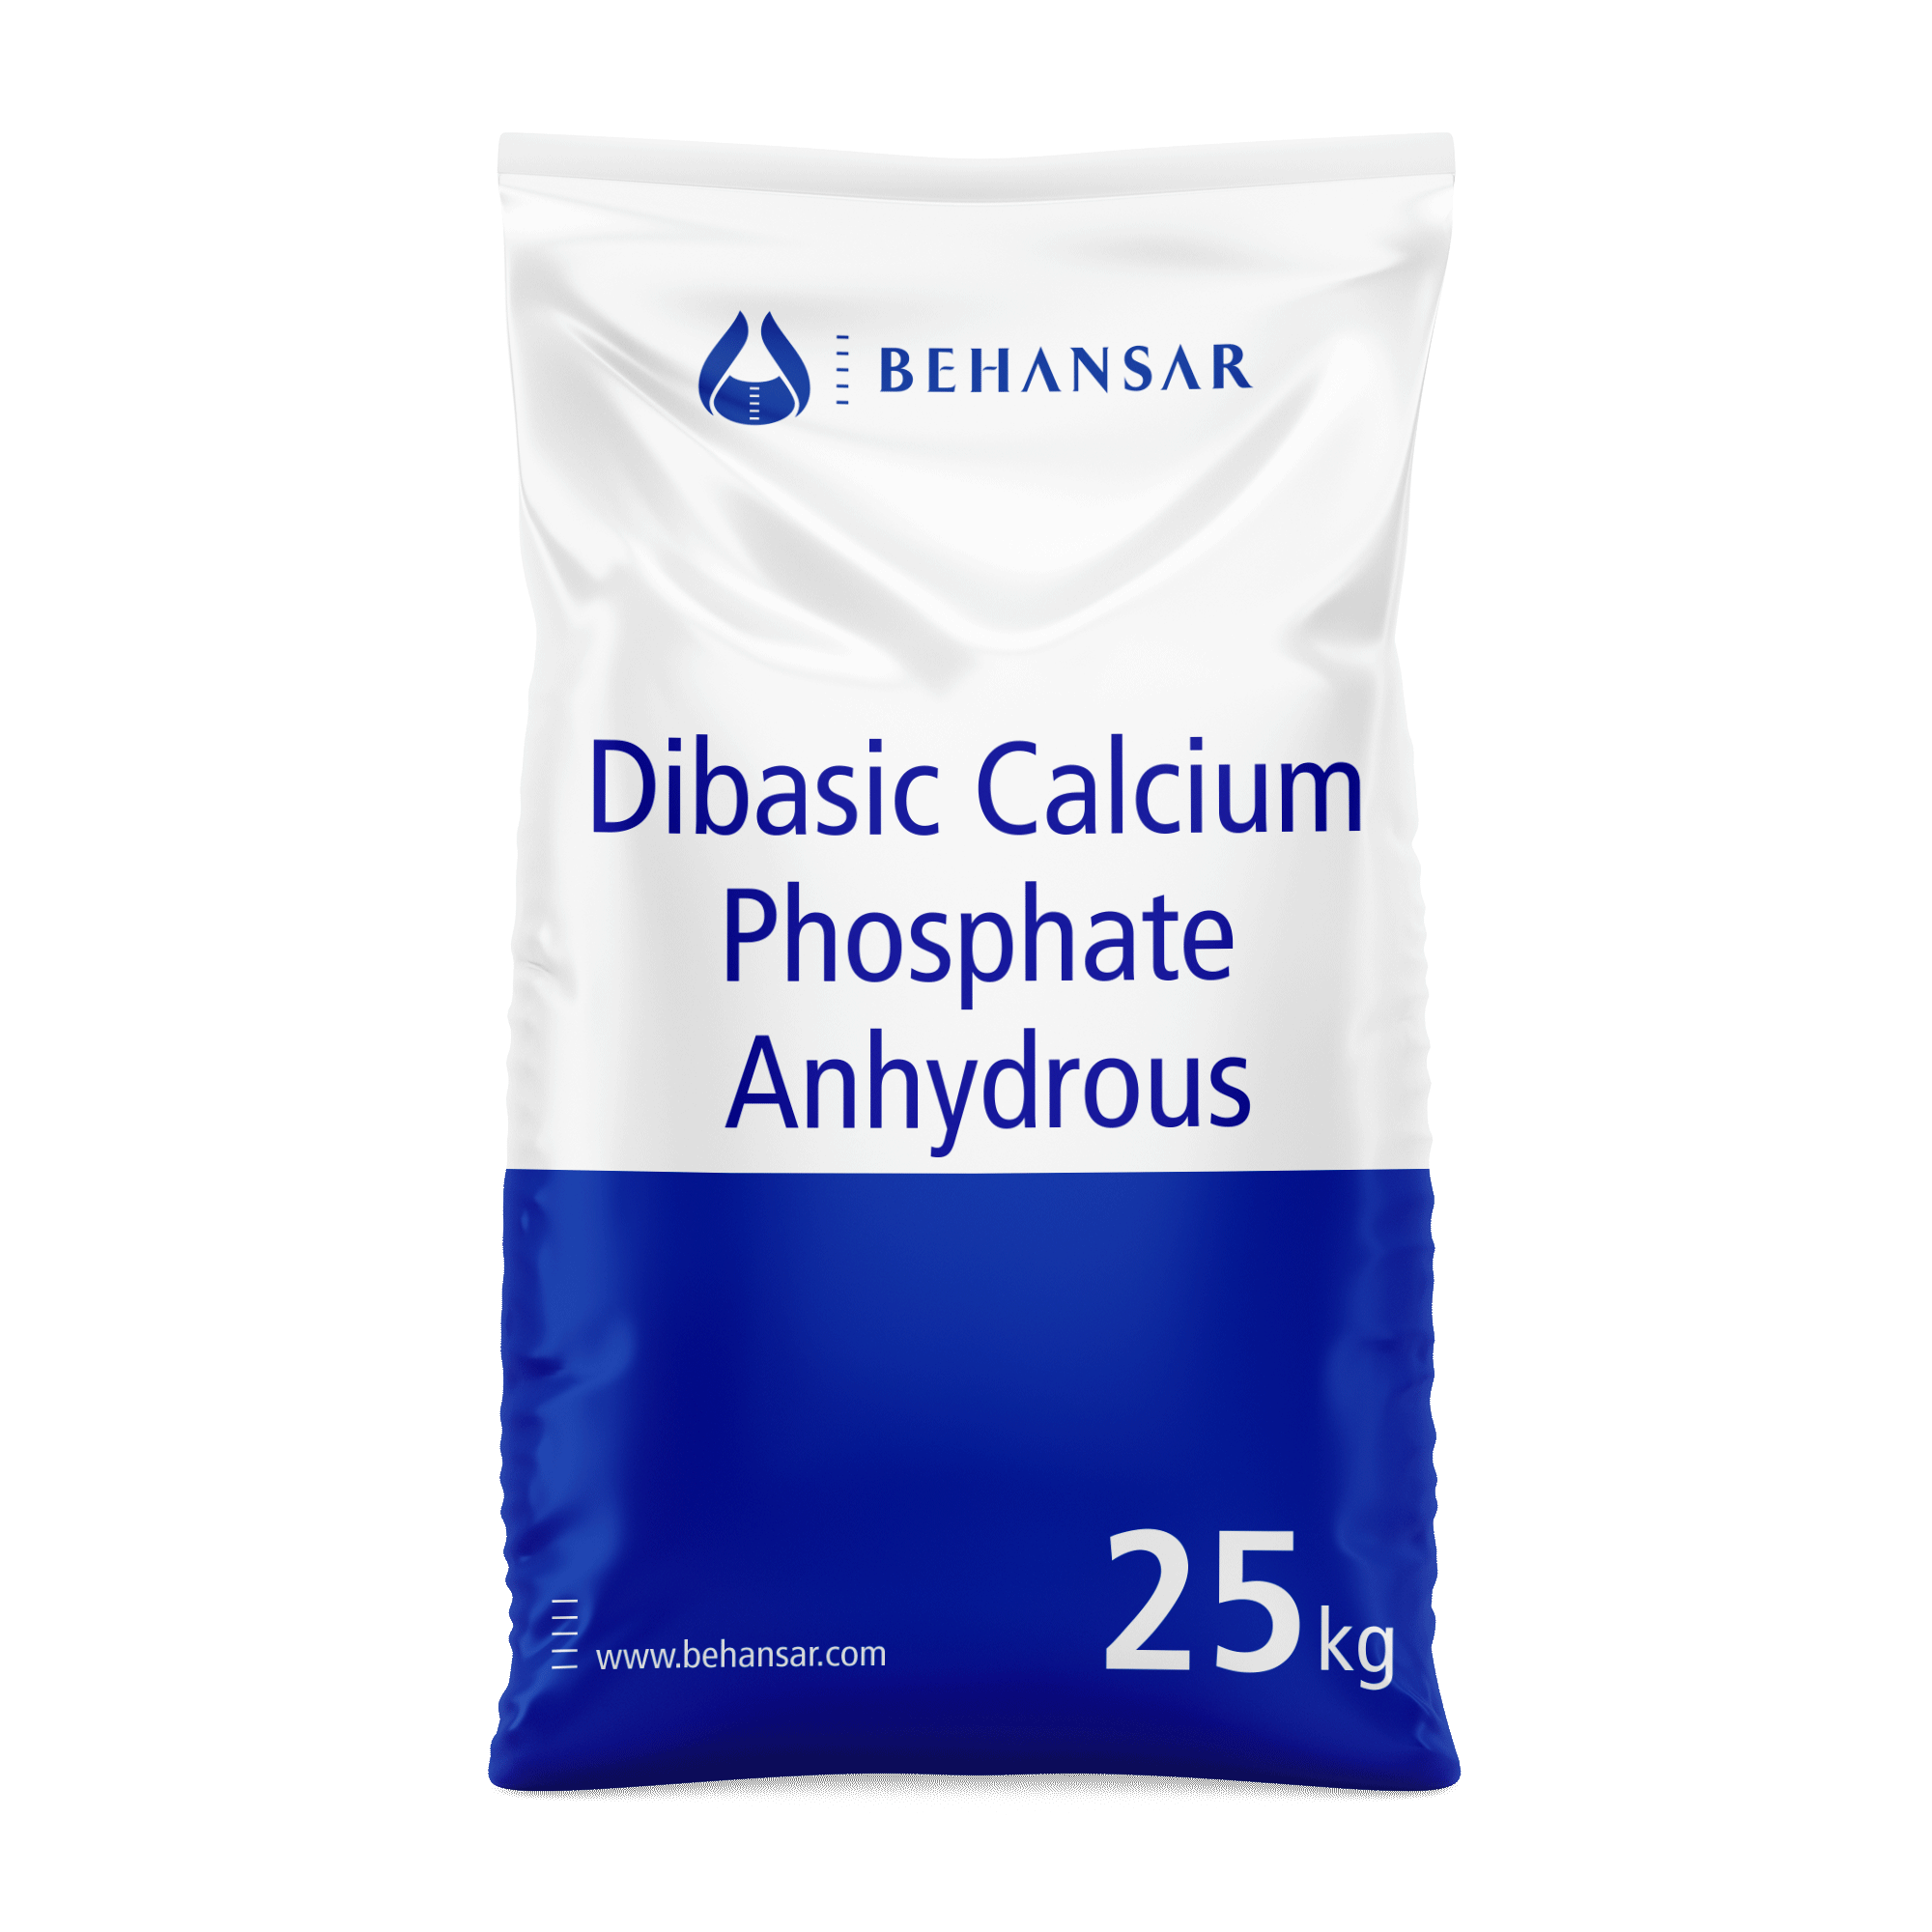 Dibasic Calcium Phosphate Anhydrous is one of the products of Behansar Co